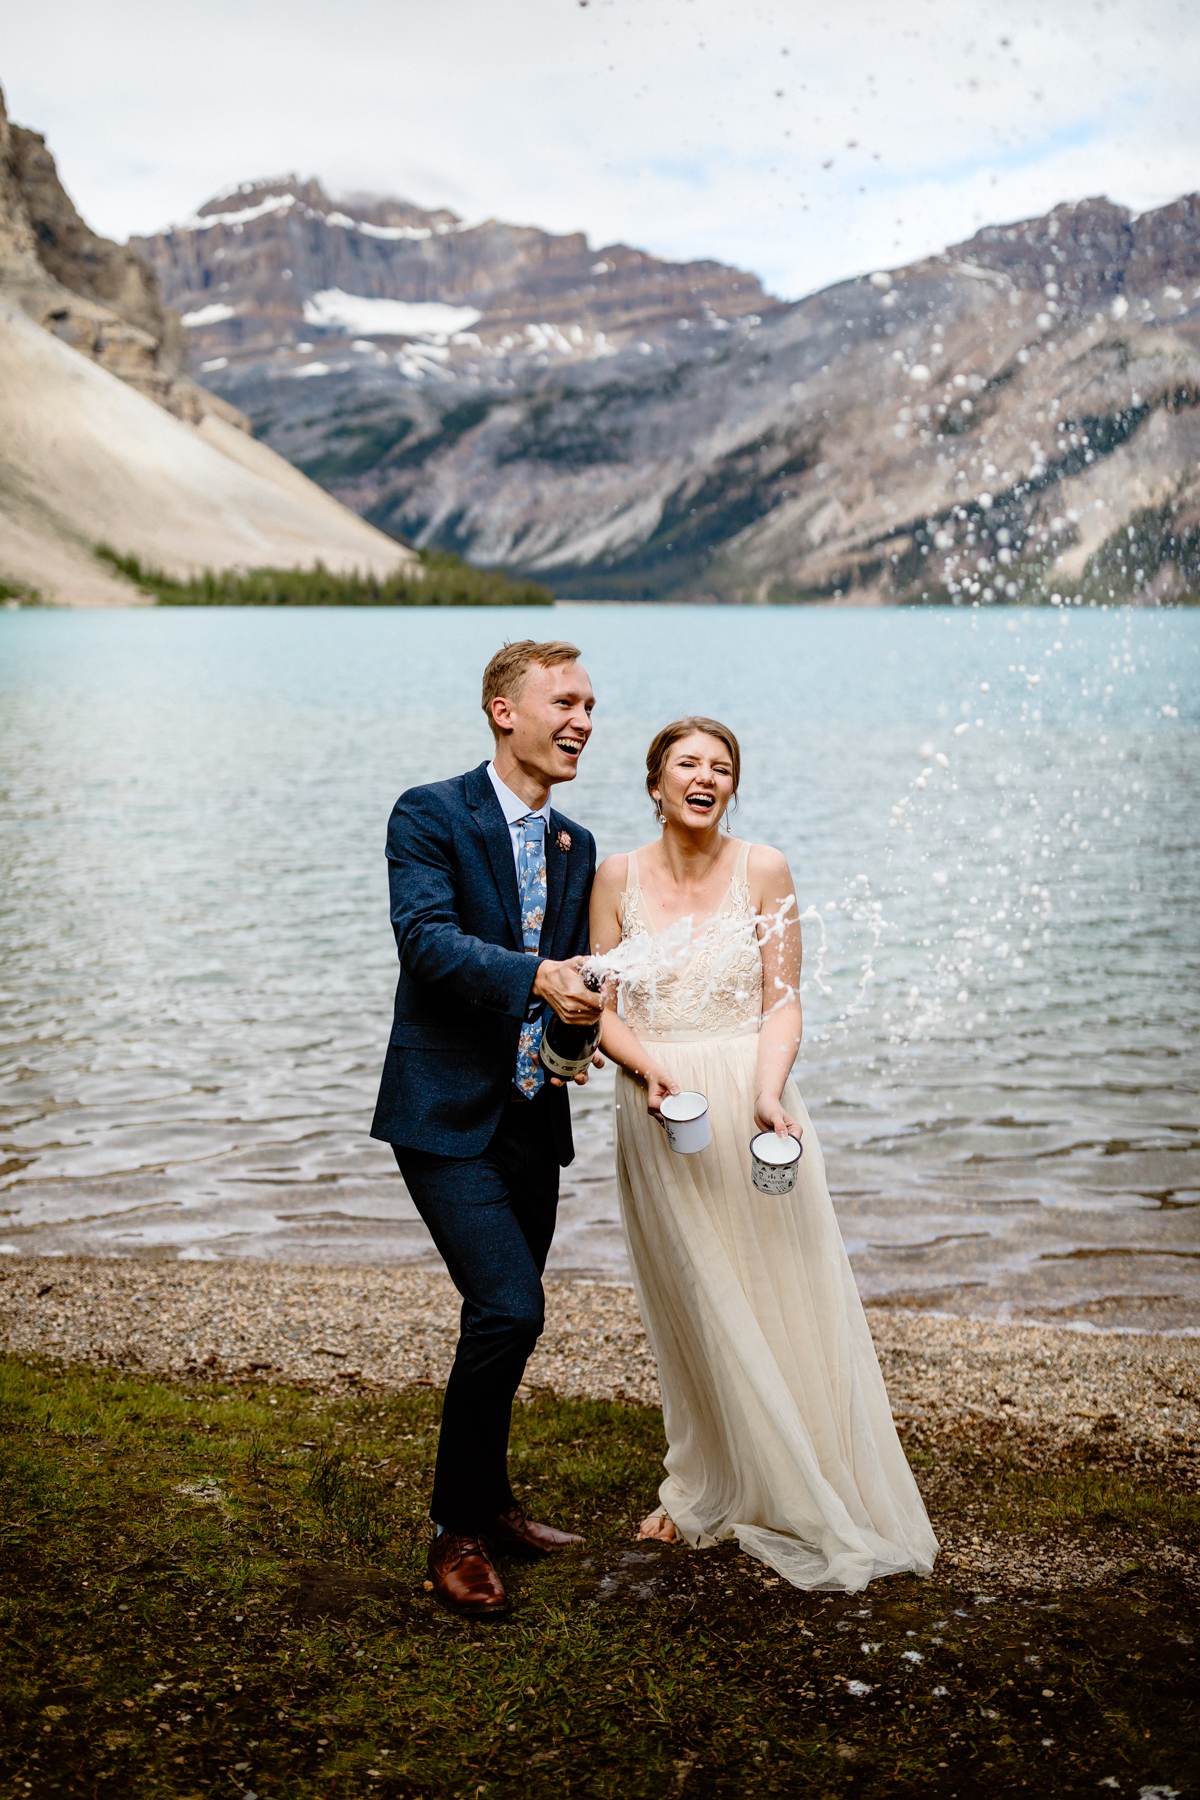 Hiking Elopement Photographers in Banff National Park - Photo 1